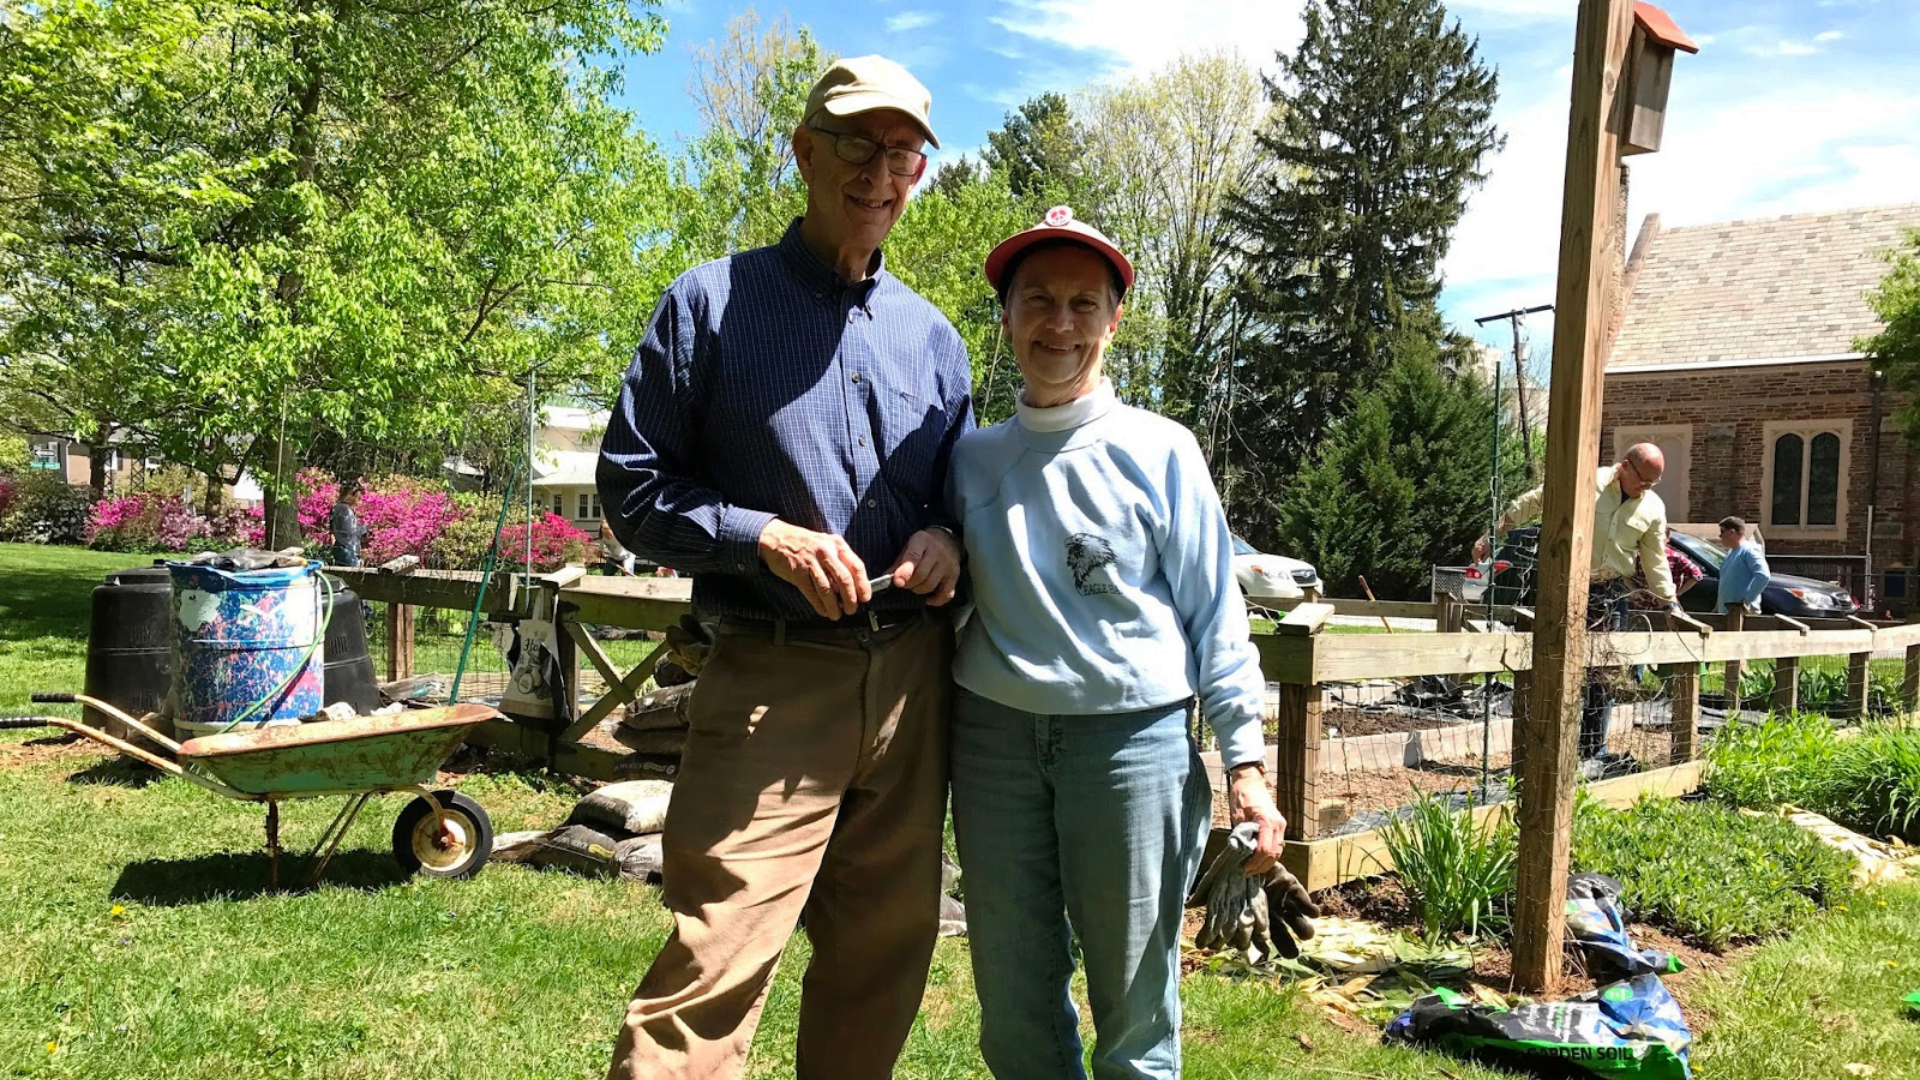 Older man and woman smiling in front of a garden that is being made